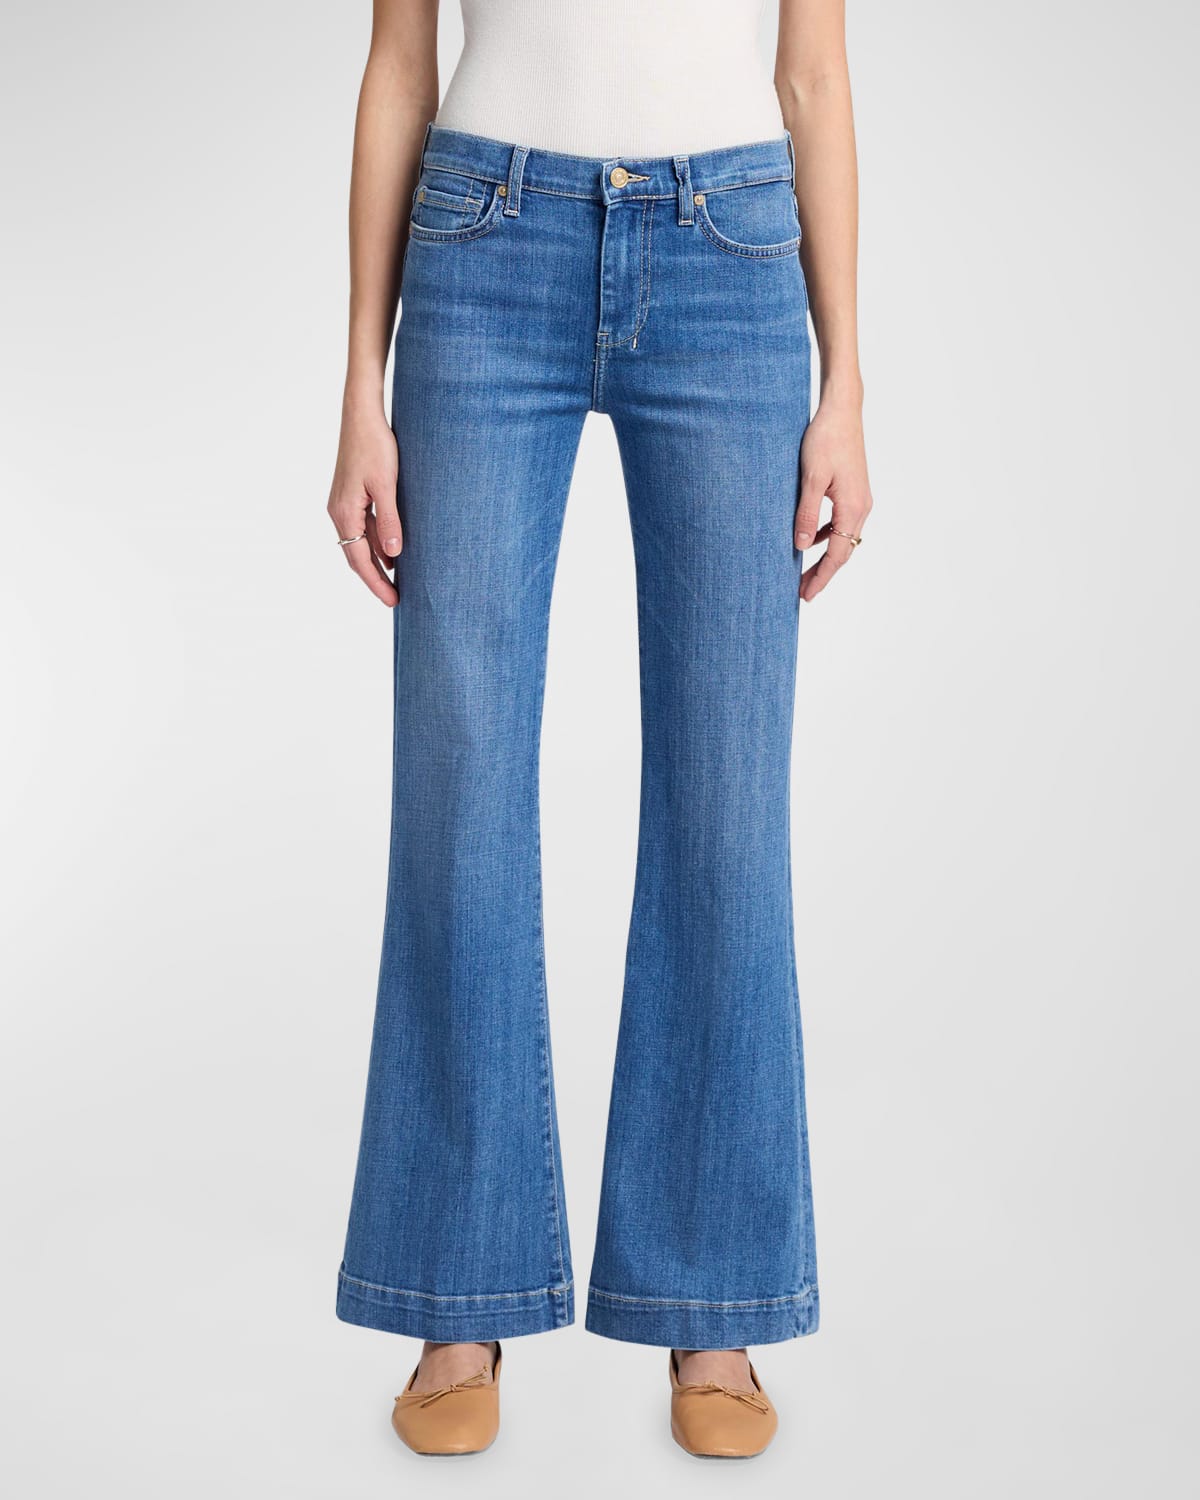 7 For All Mankind Dojo Tailorless Jeans In Call Me